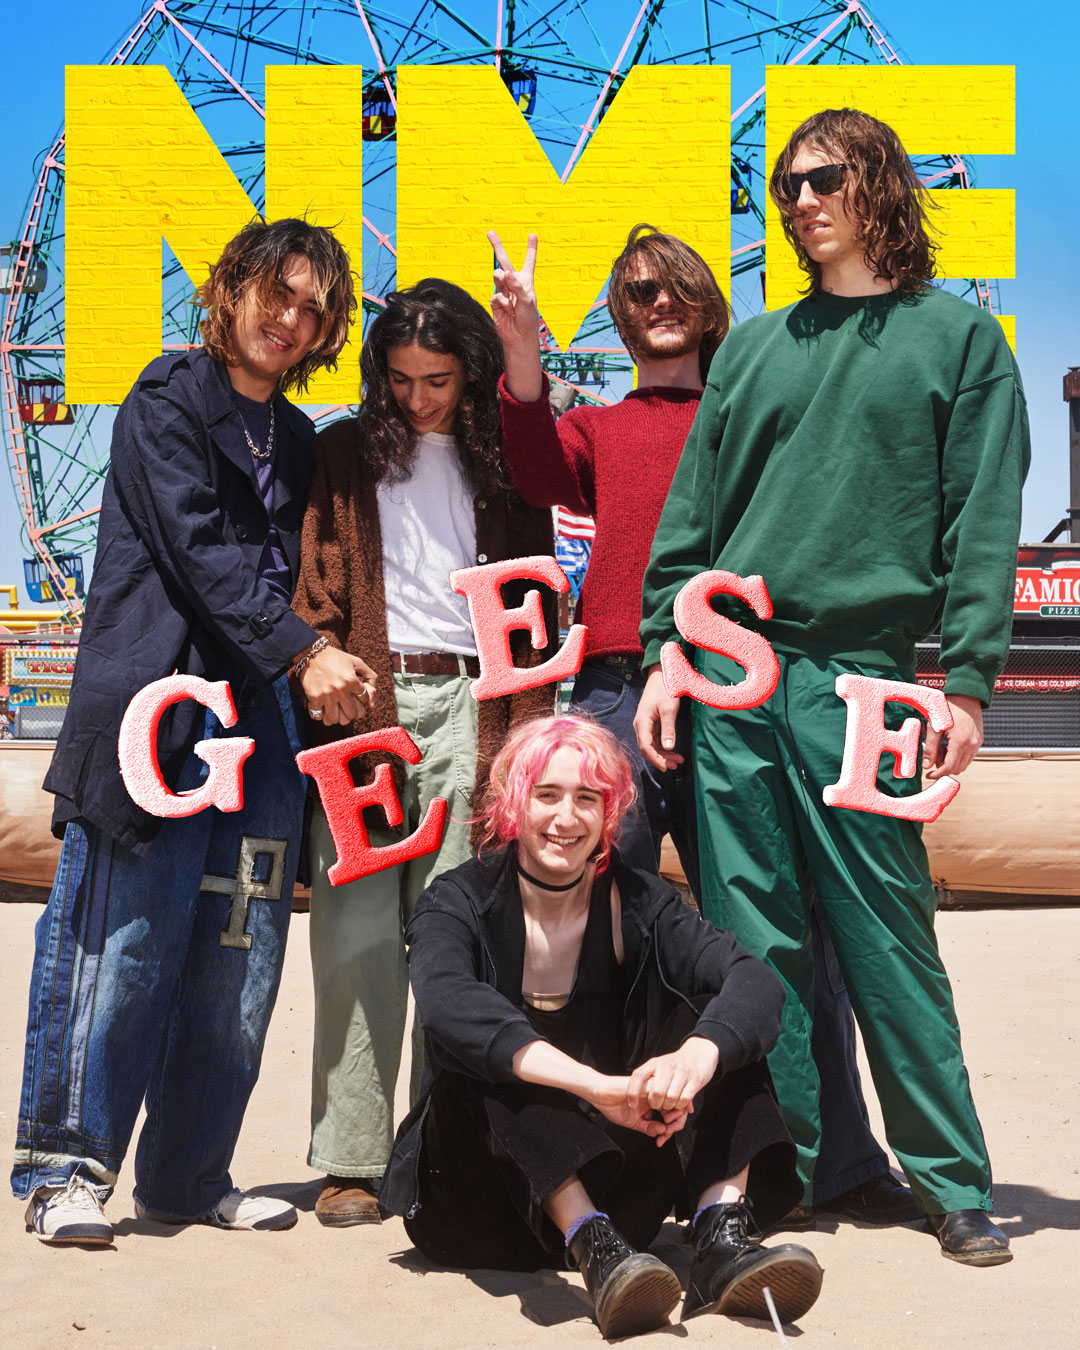 NME.COVER.GEESE.FINAL.web